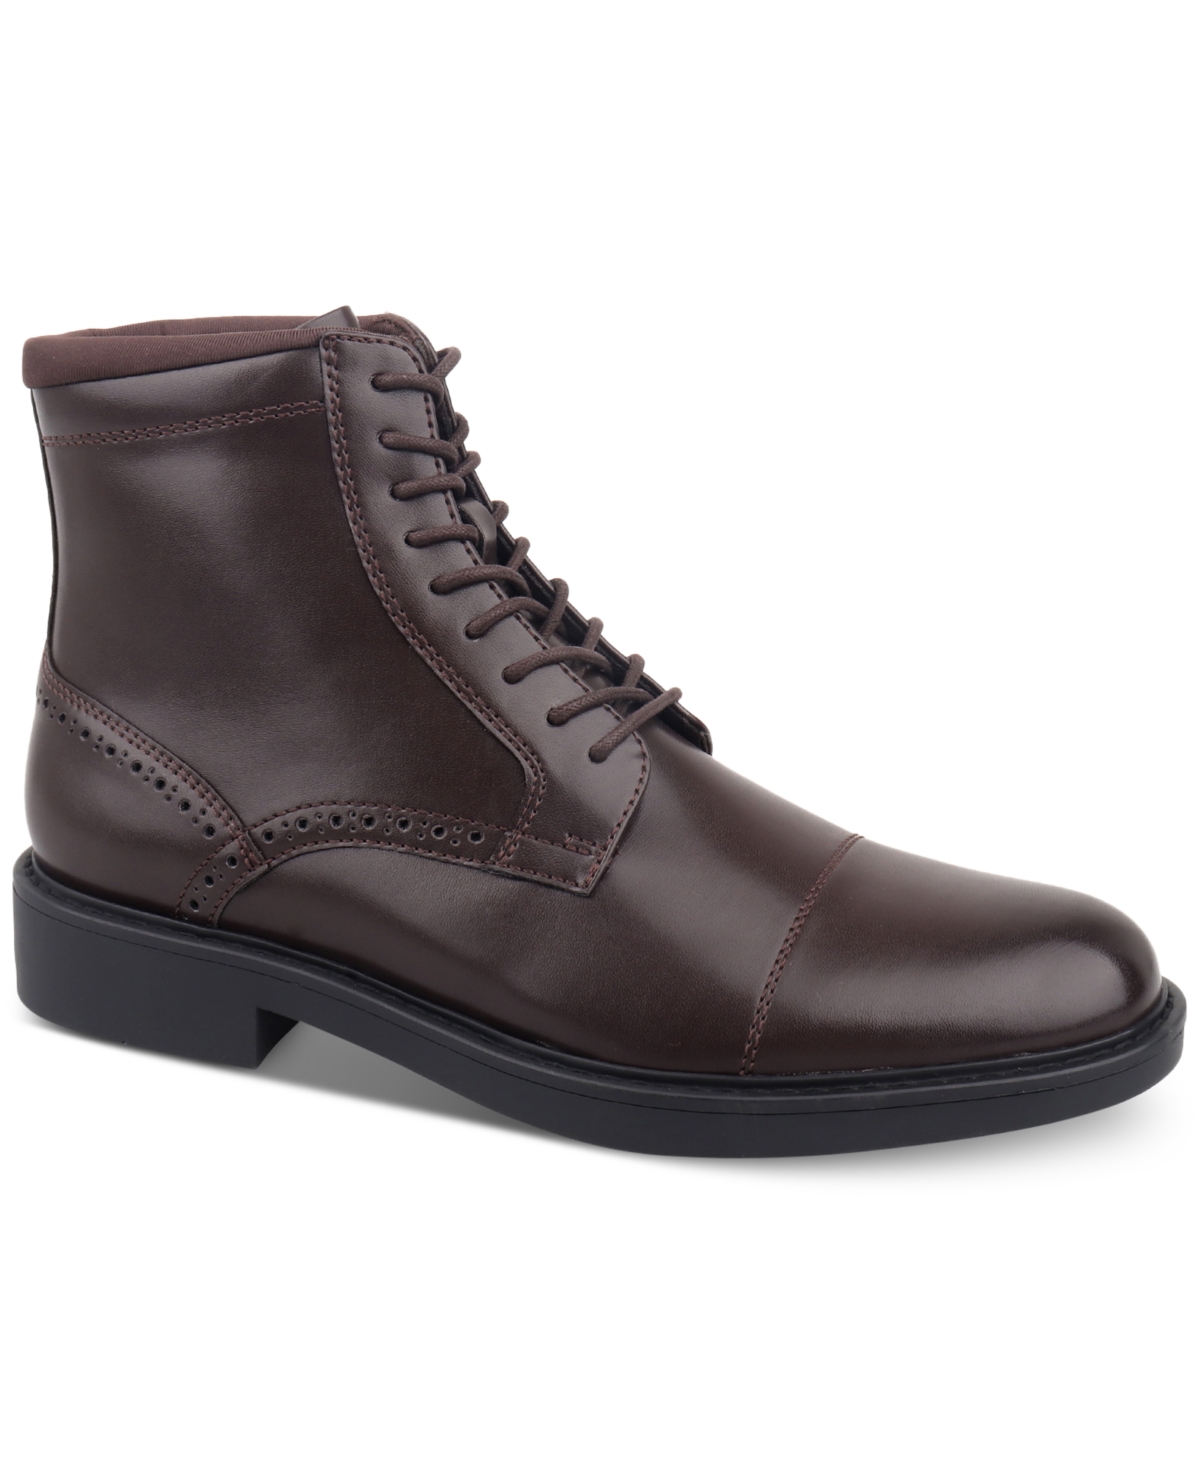 Men's Elroy Lace-Up Cap-Toe Boots, Created for Macy's - Brown